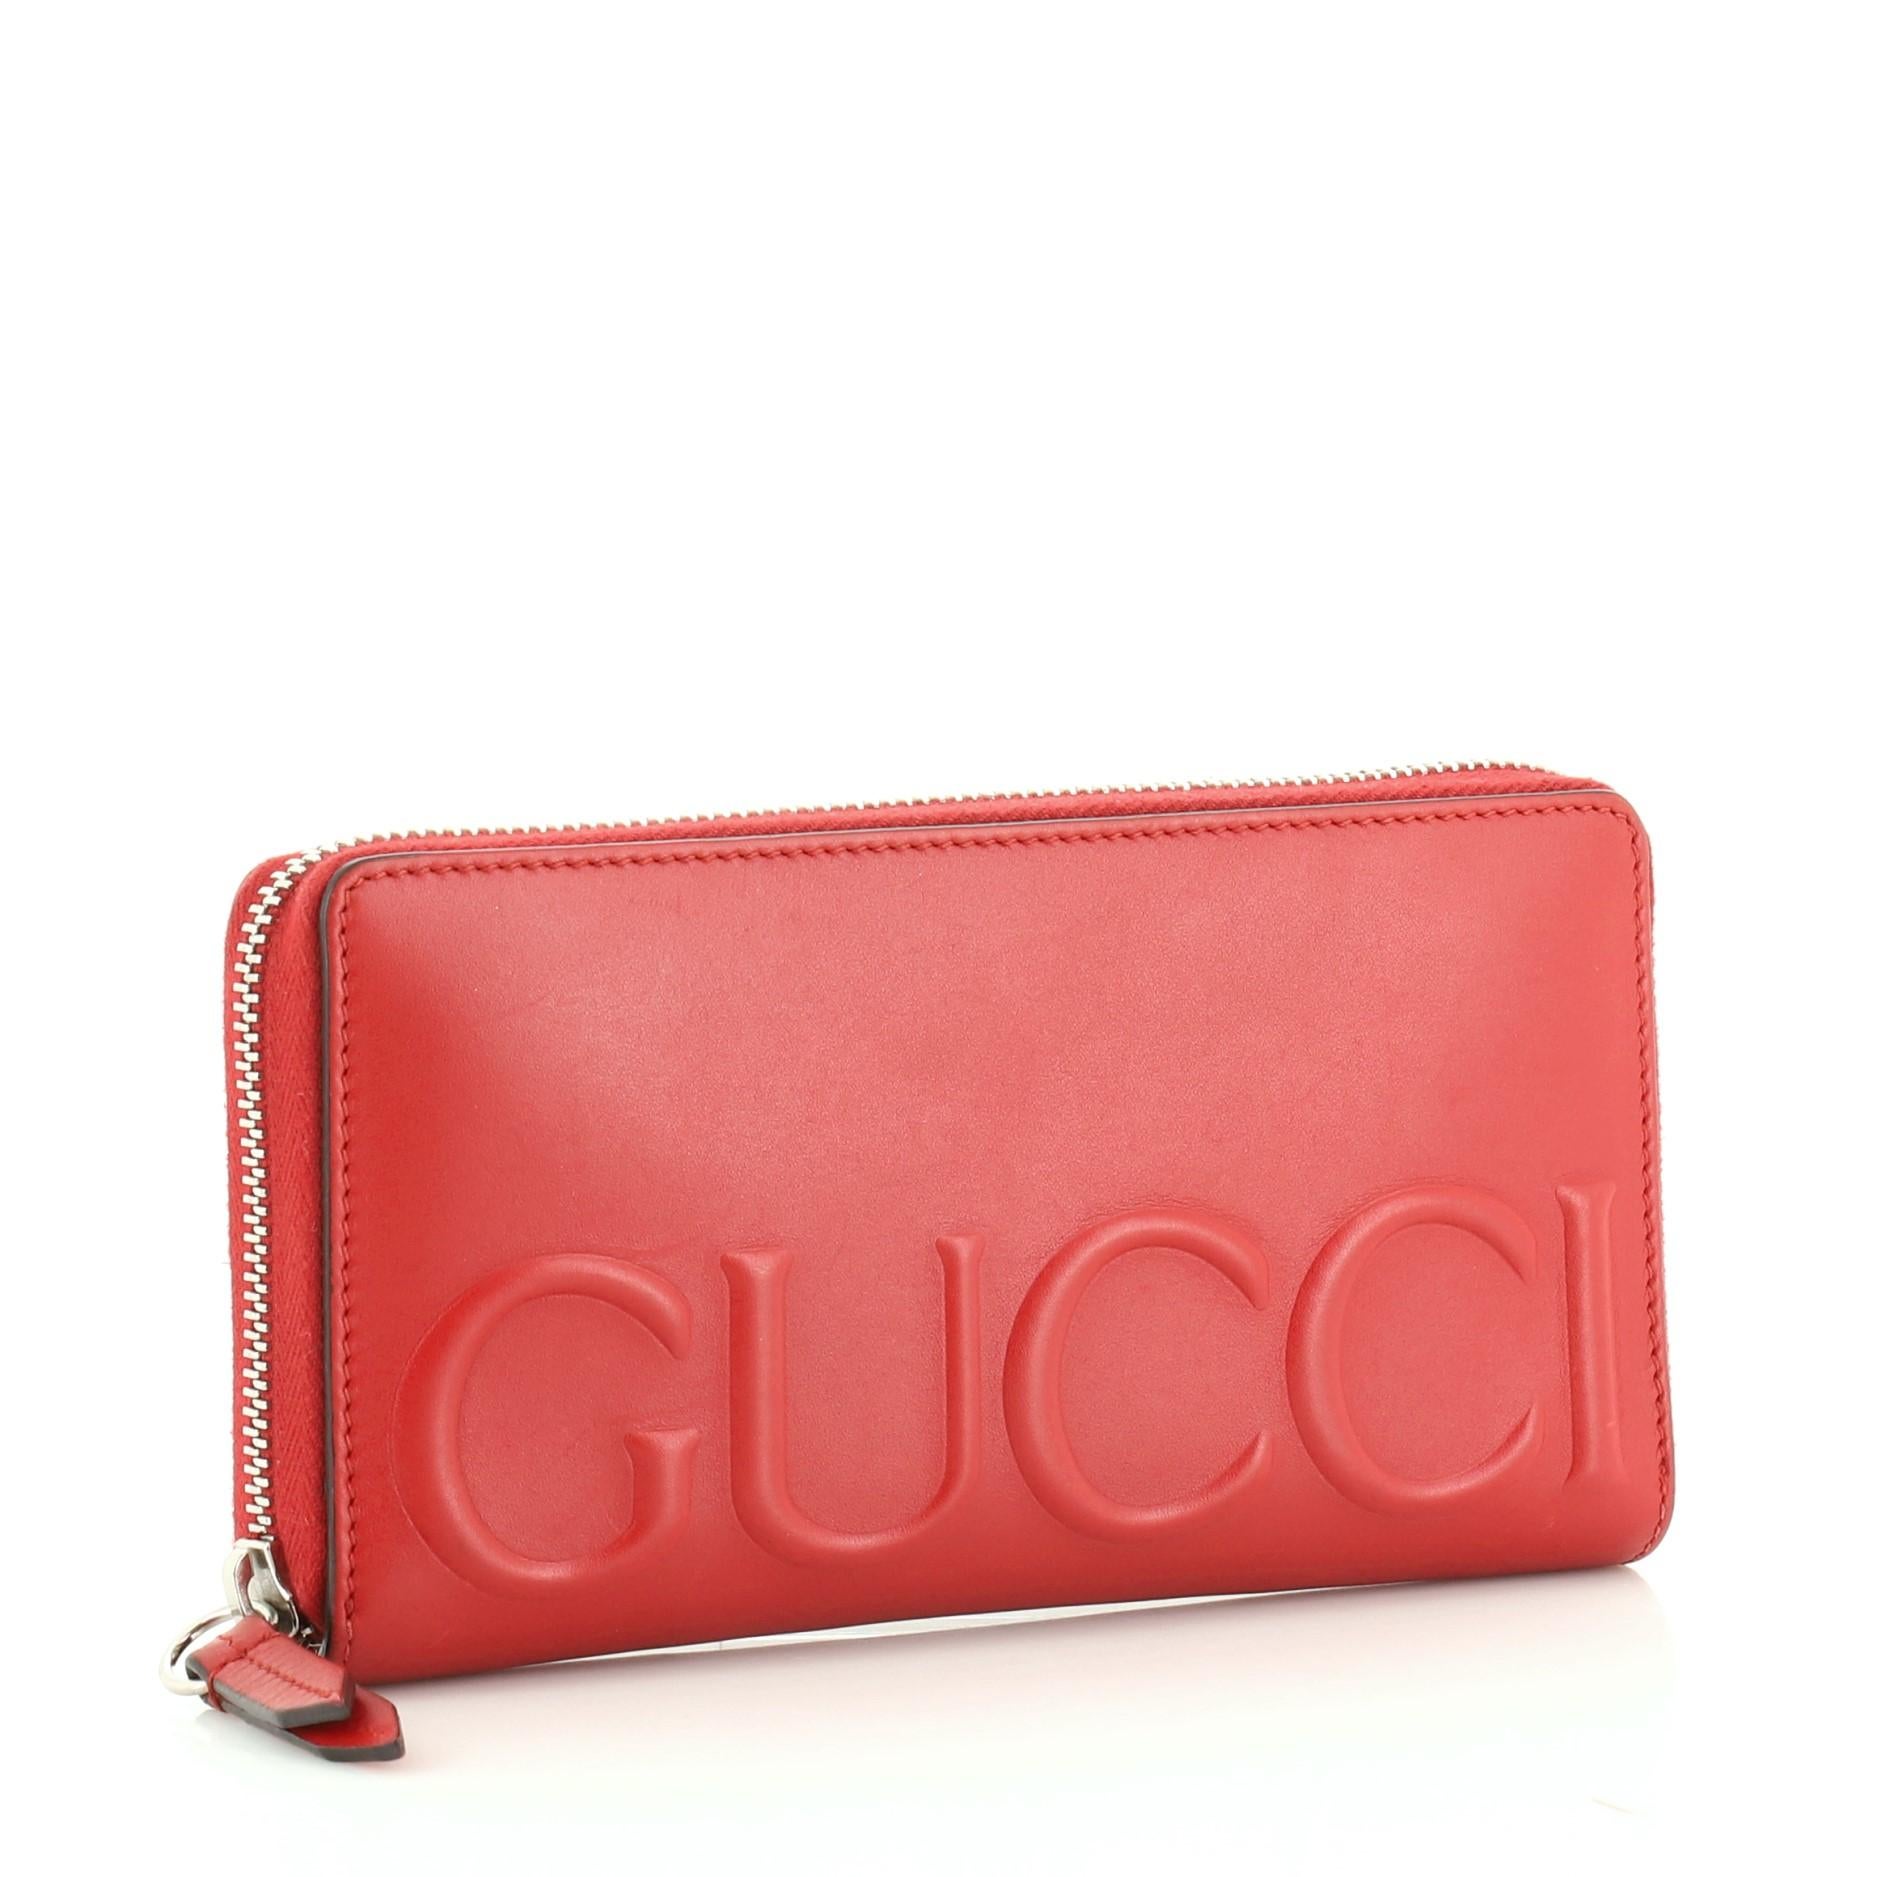 This Gucci XL Zip Around Wallet Leather, crafted in red leather, features an embossed Gucci logo on front and silver-tone hardware. Its zip closure opens to a red leather interior with multiple card slots and zip pocket. 

Estimated Retail Price: